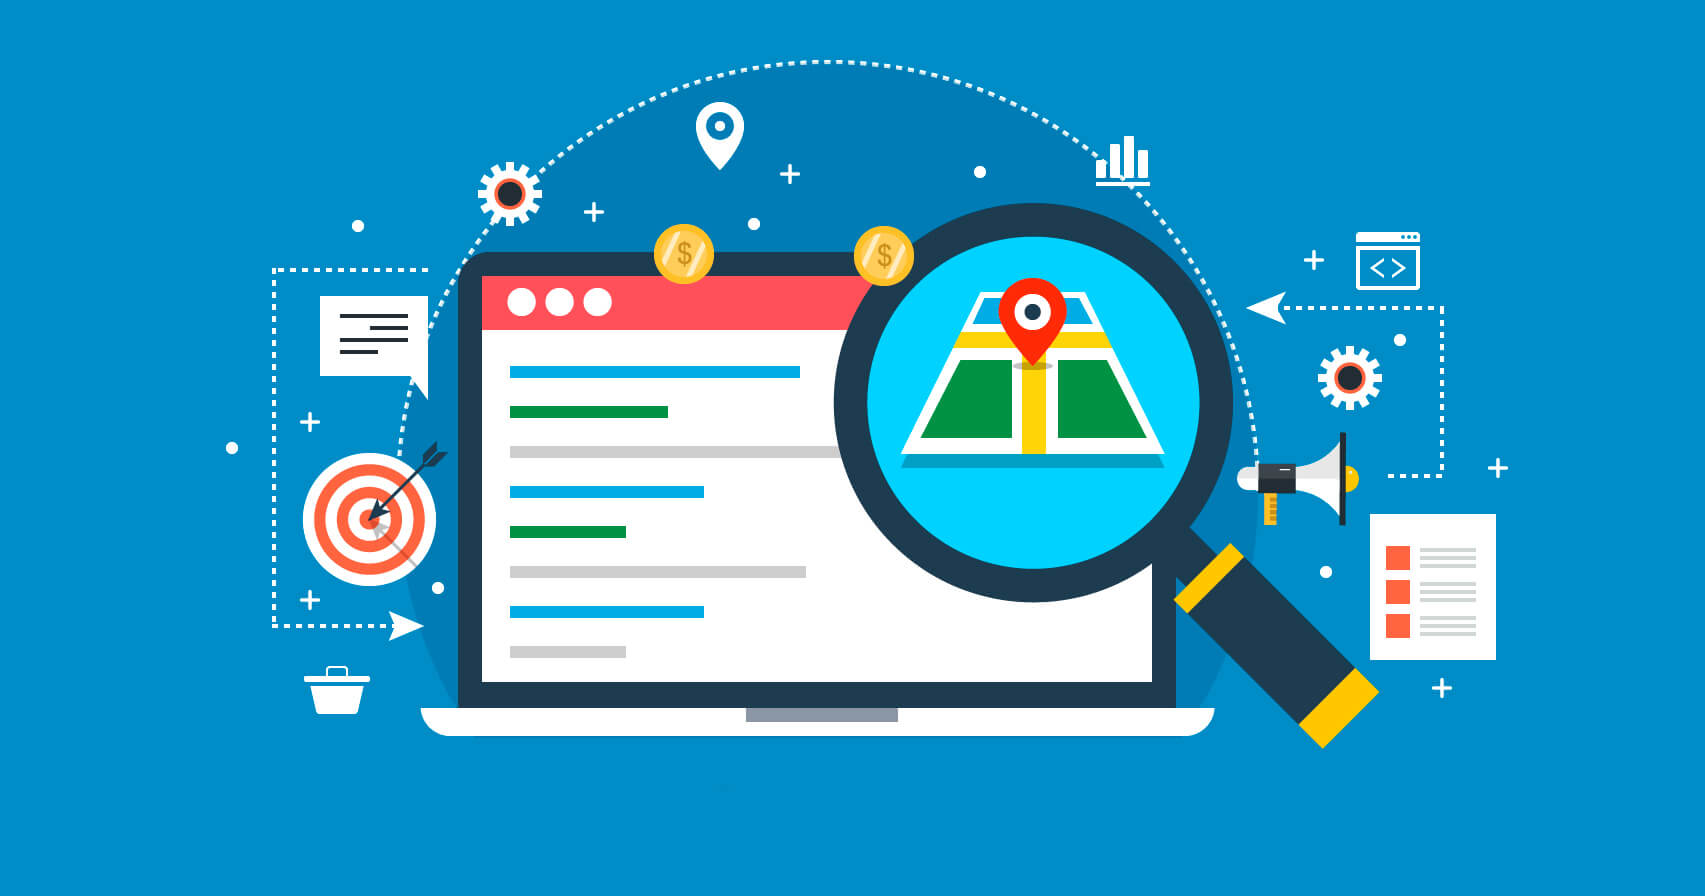 Local SEO Tips to Help You Appear Higher in Search Results